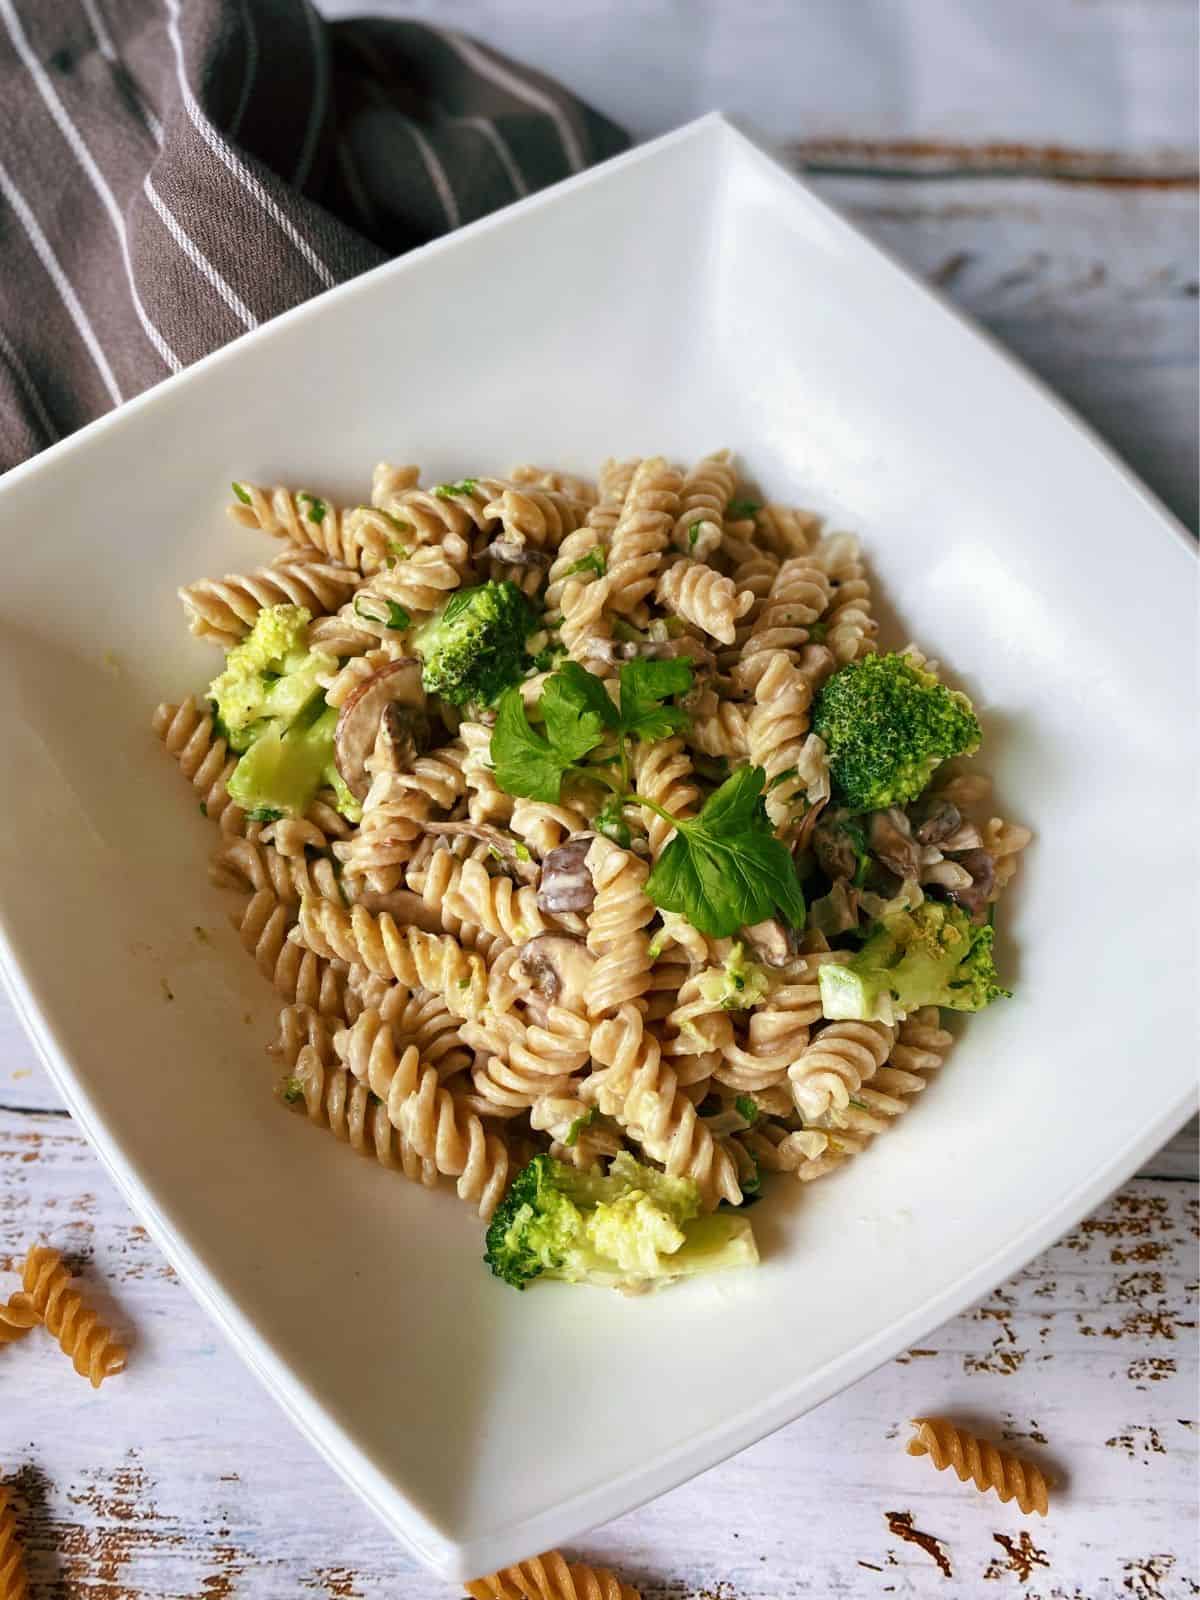 Fusilli pasta with broccoli and mushroom in a white square bowl, garnished with parsley.